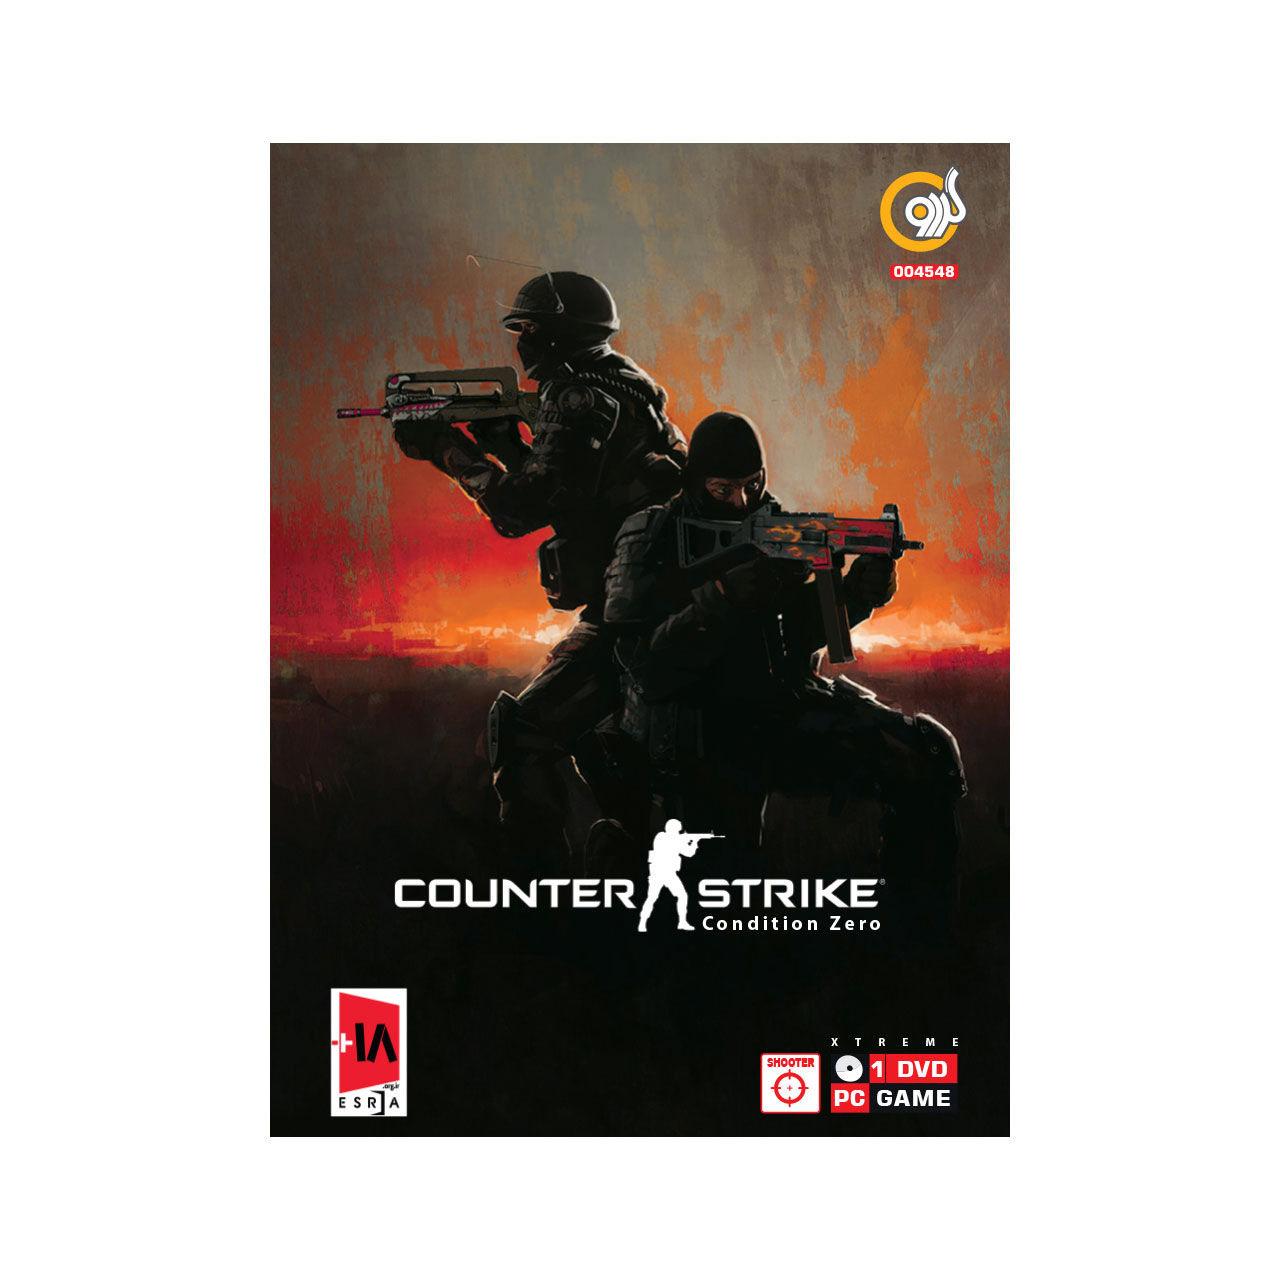 Deathmatch Classic, day Of Defeat, counter Strike 1, counterstrike Online  2, counterstrike Condition Zero, ricochet, cs Go, counterstrike 16,  counterstrike Source, counter Strike